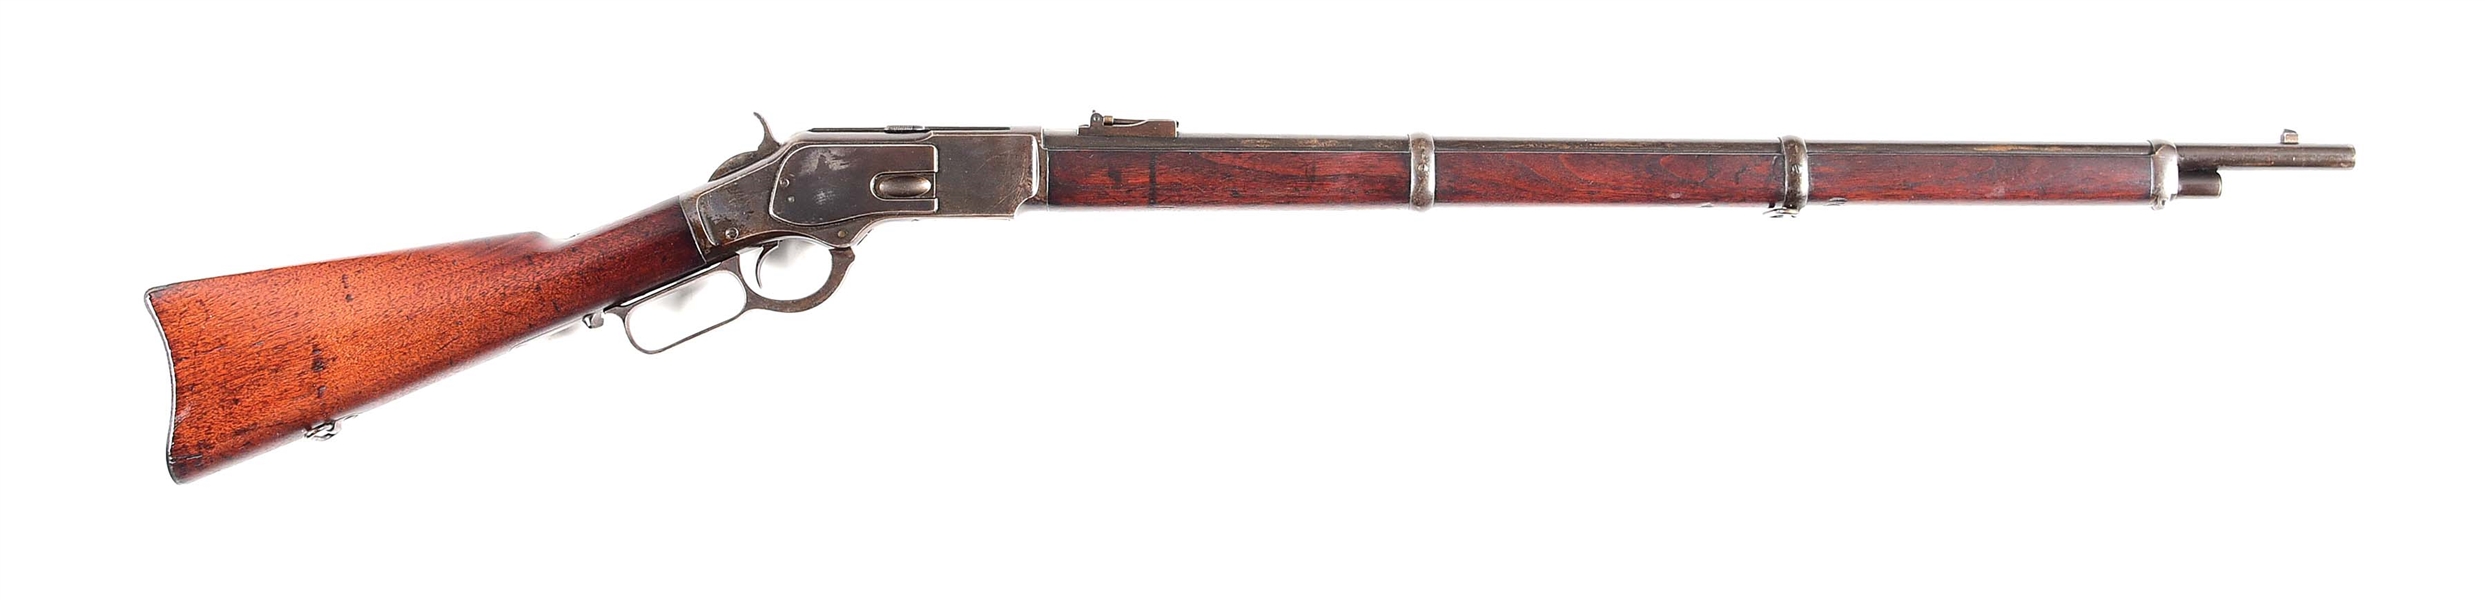 (A) WINCHESTER MODEL 1873 MUSKET LEVER ACTION RIFLE (1891).